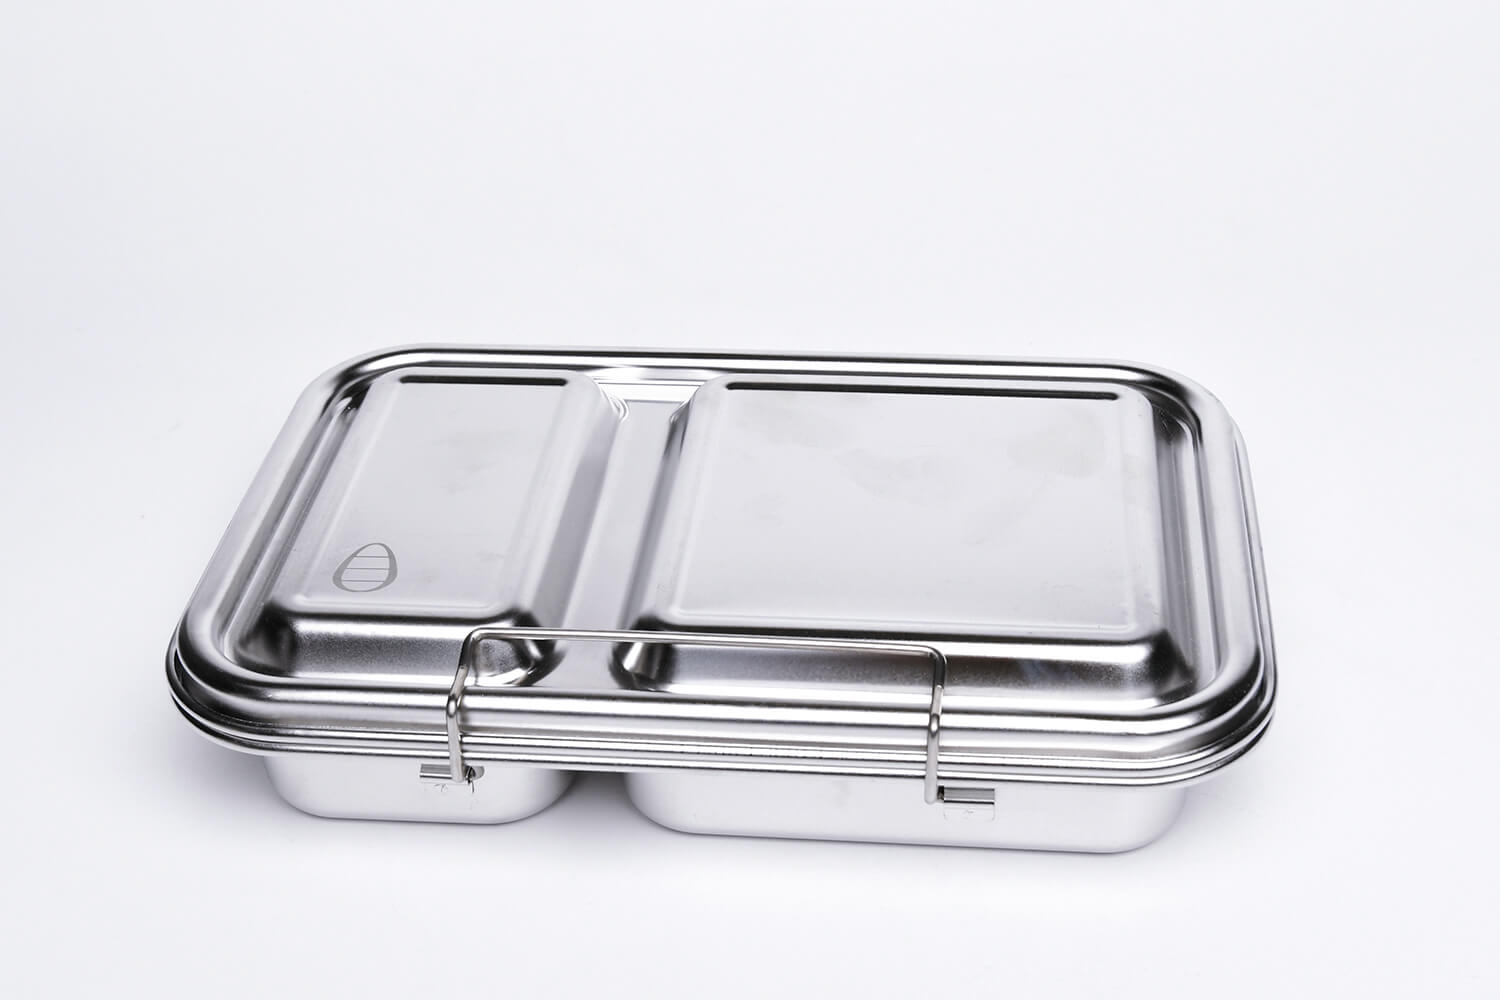 Reasons to Switch to Stainless Steel Lunch Boxes - Ecococoon ™